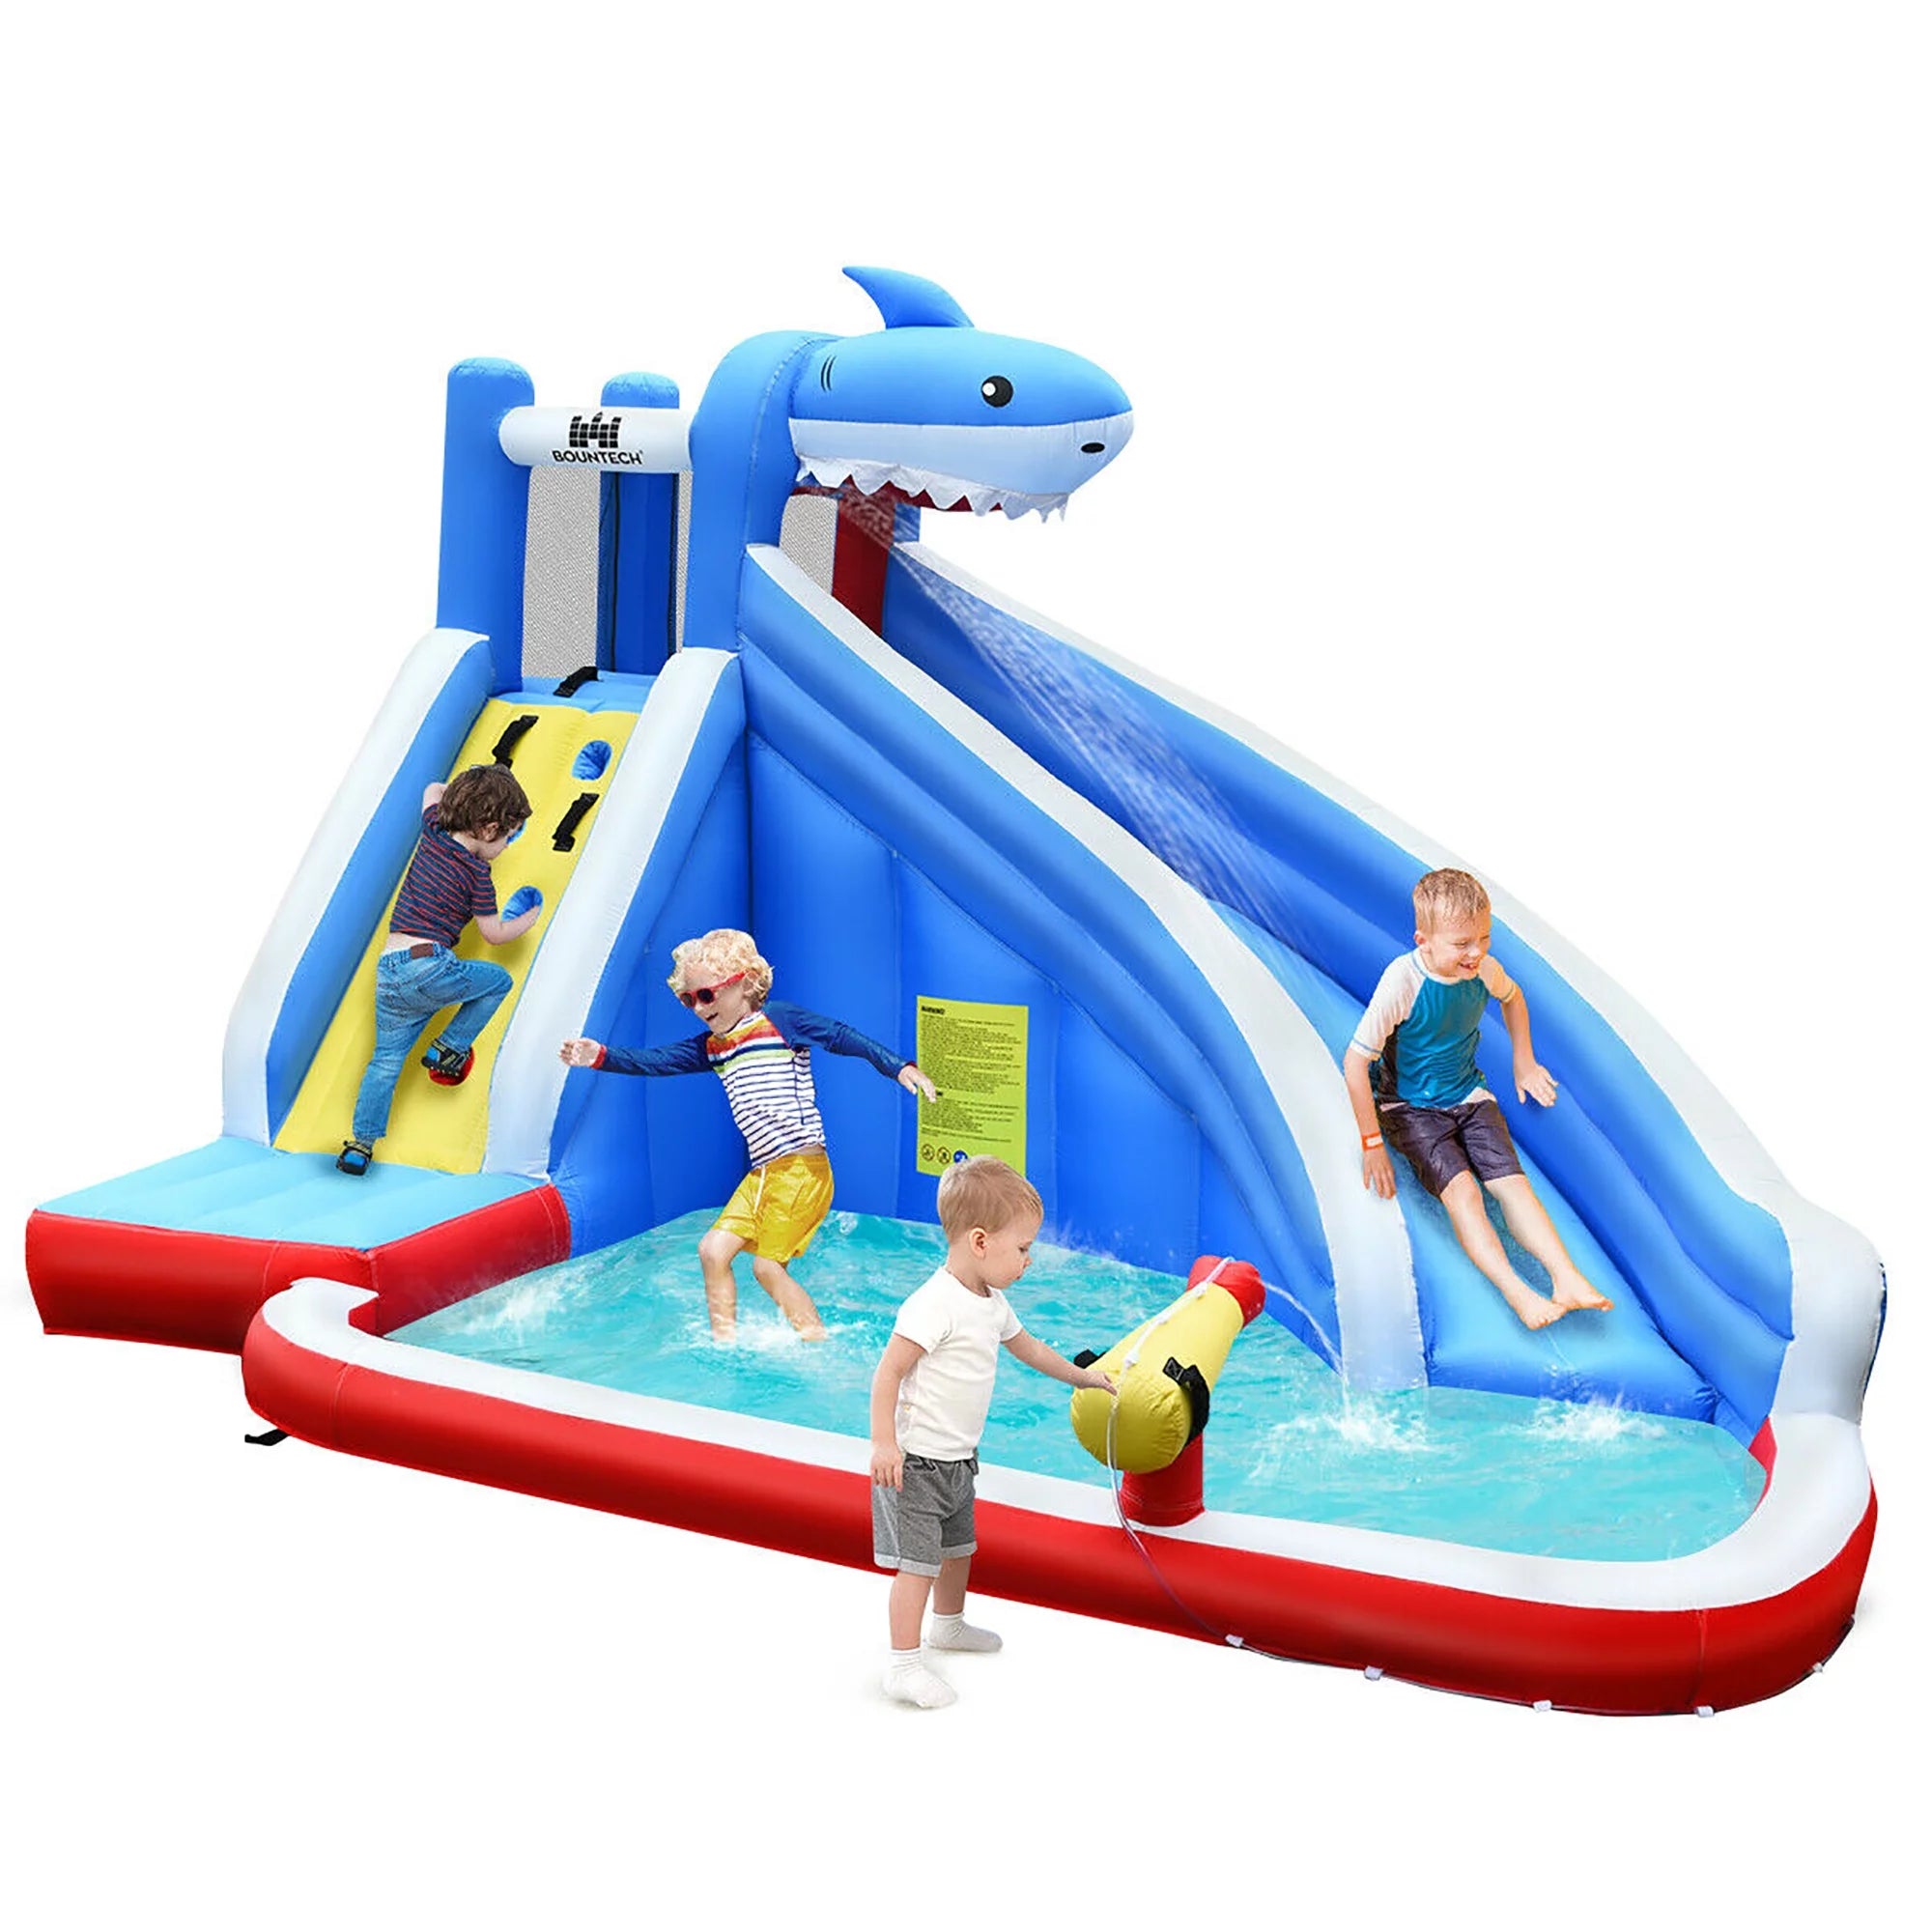 Inflatable Water Slide Houses On Sale